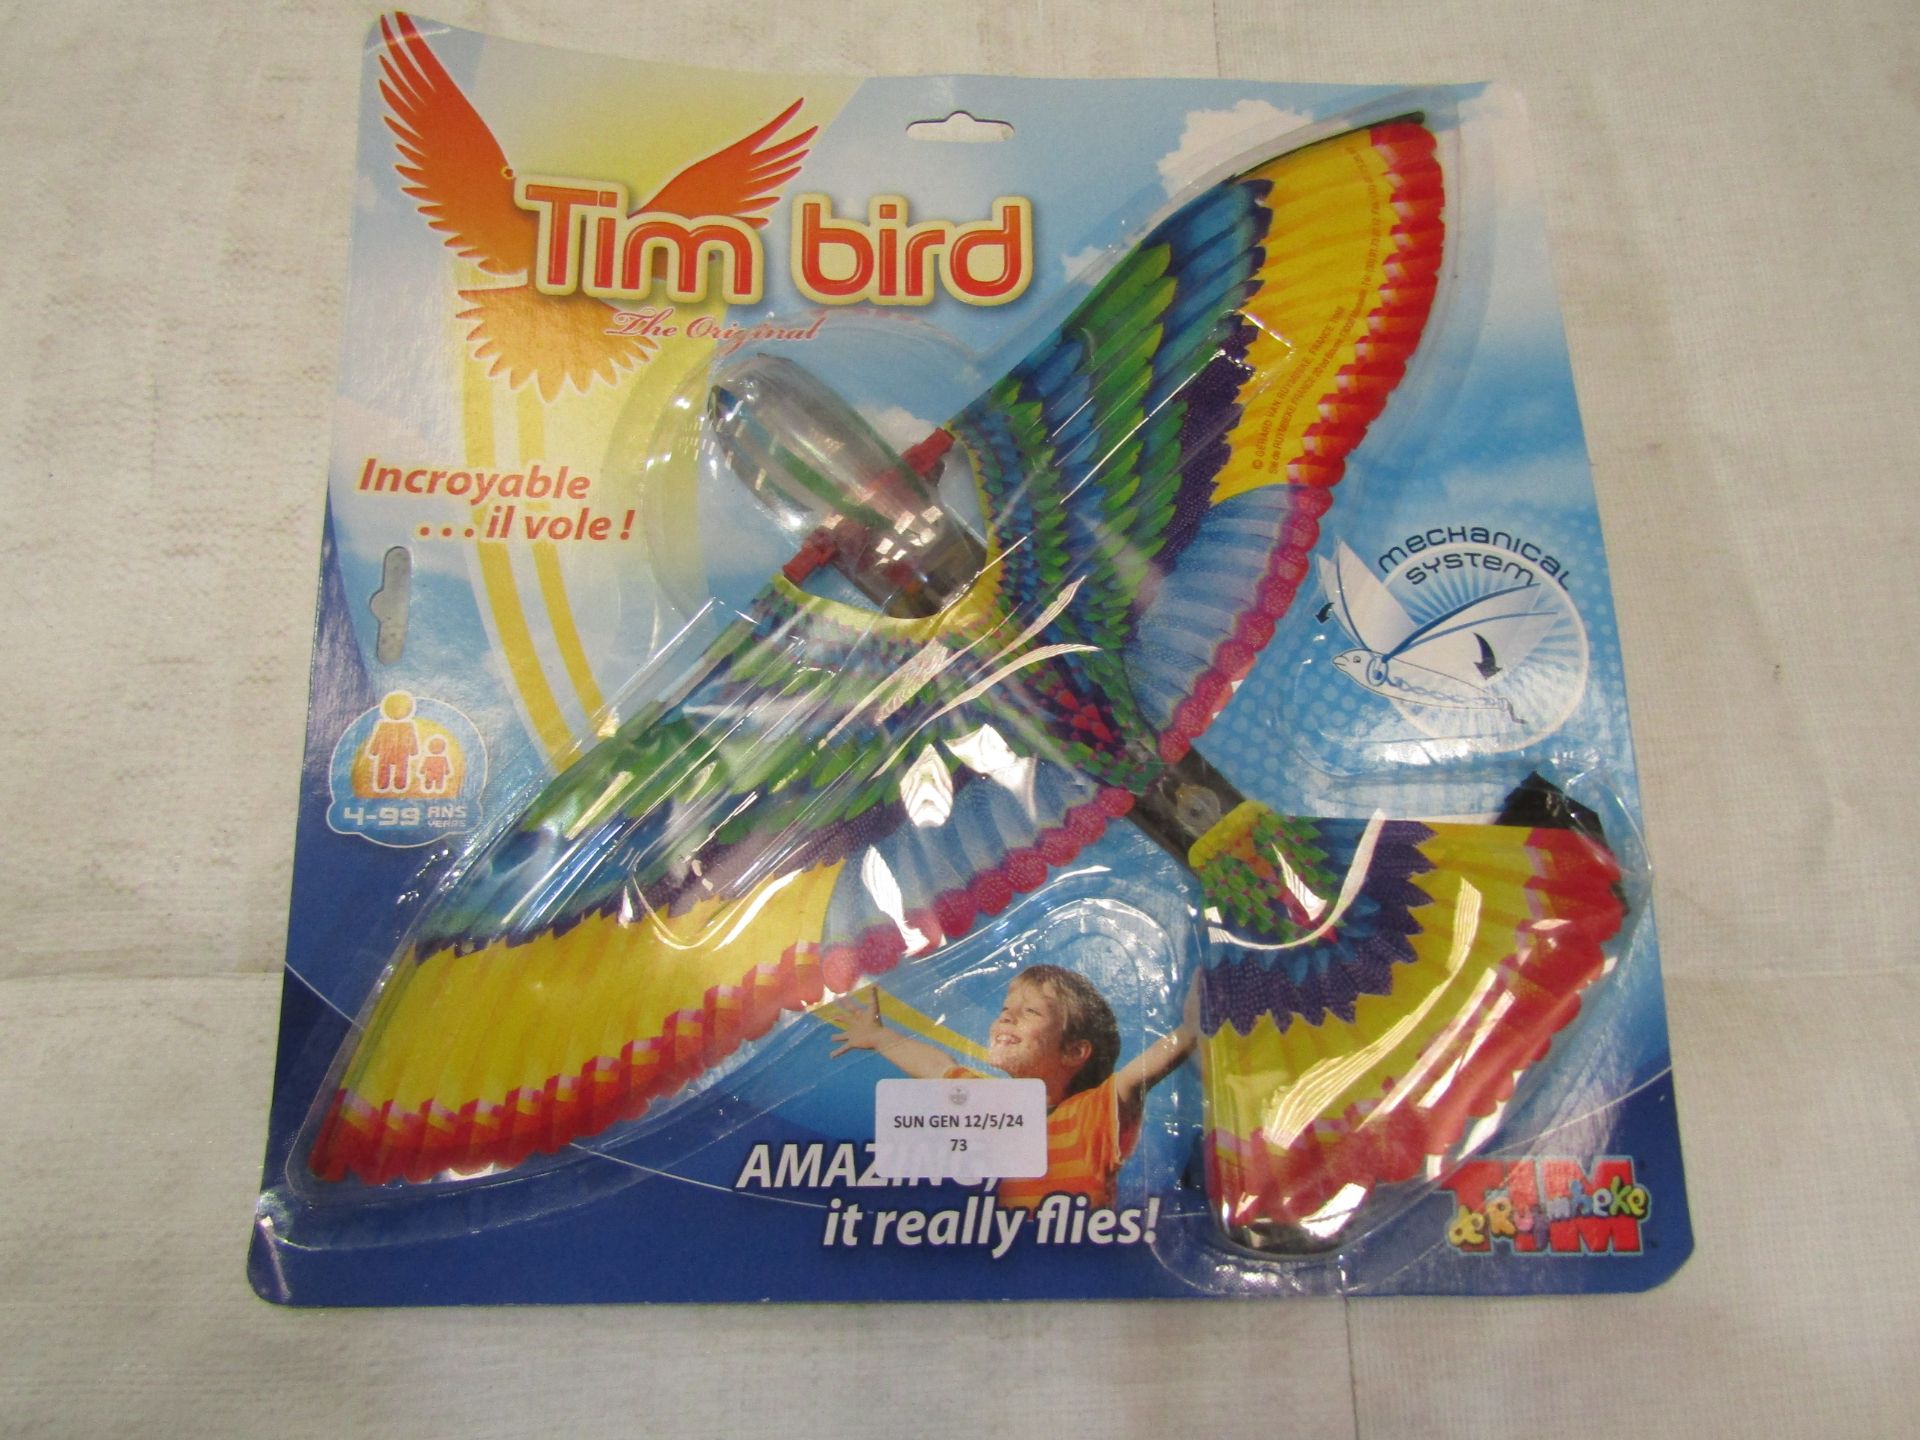 Tim Bird The Original Flies Up To 50 Yards By Flapping Its Wings - Unchecked & Boxed.